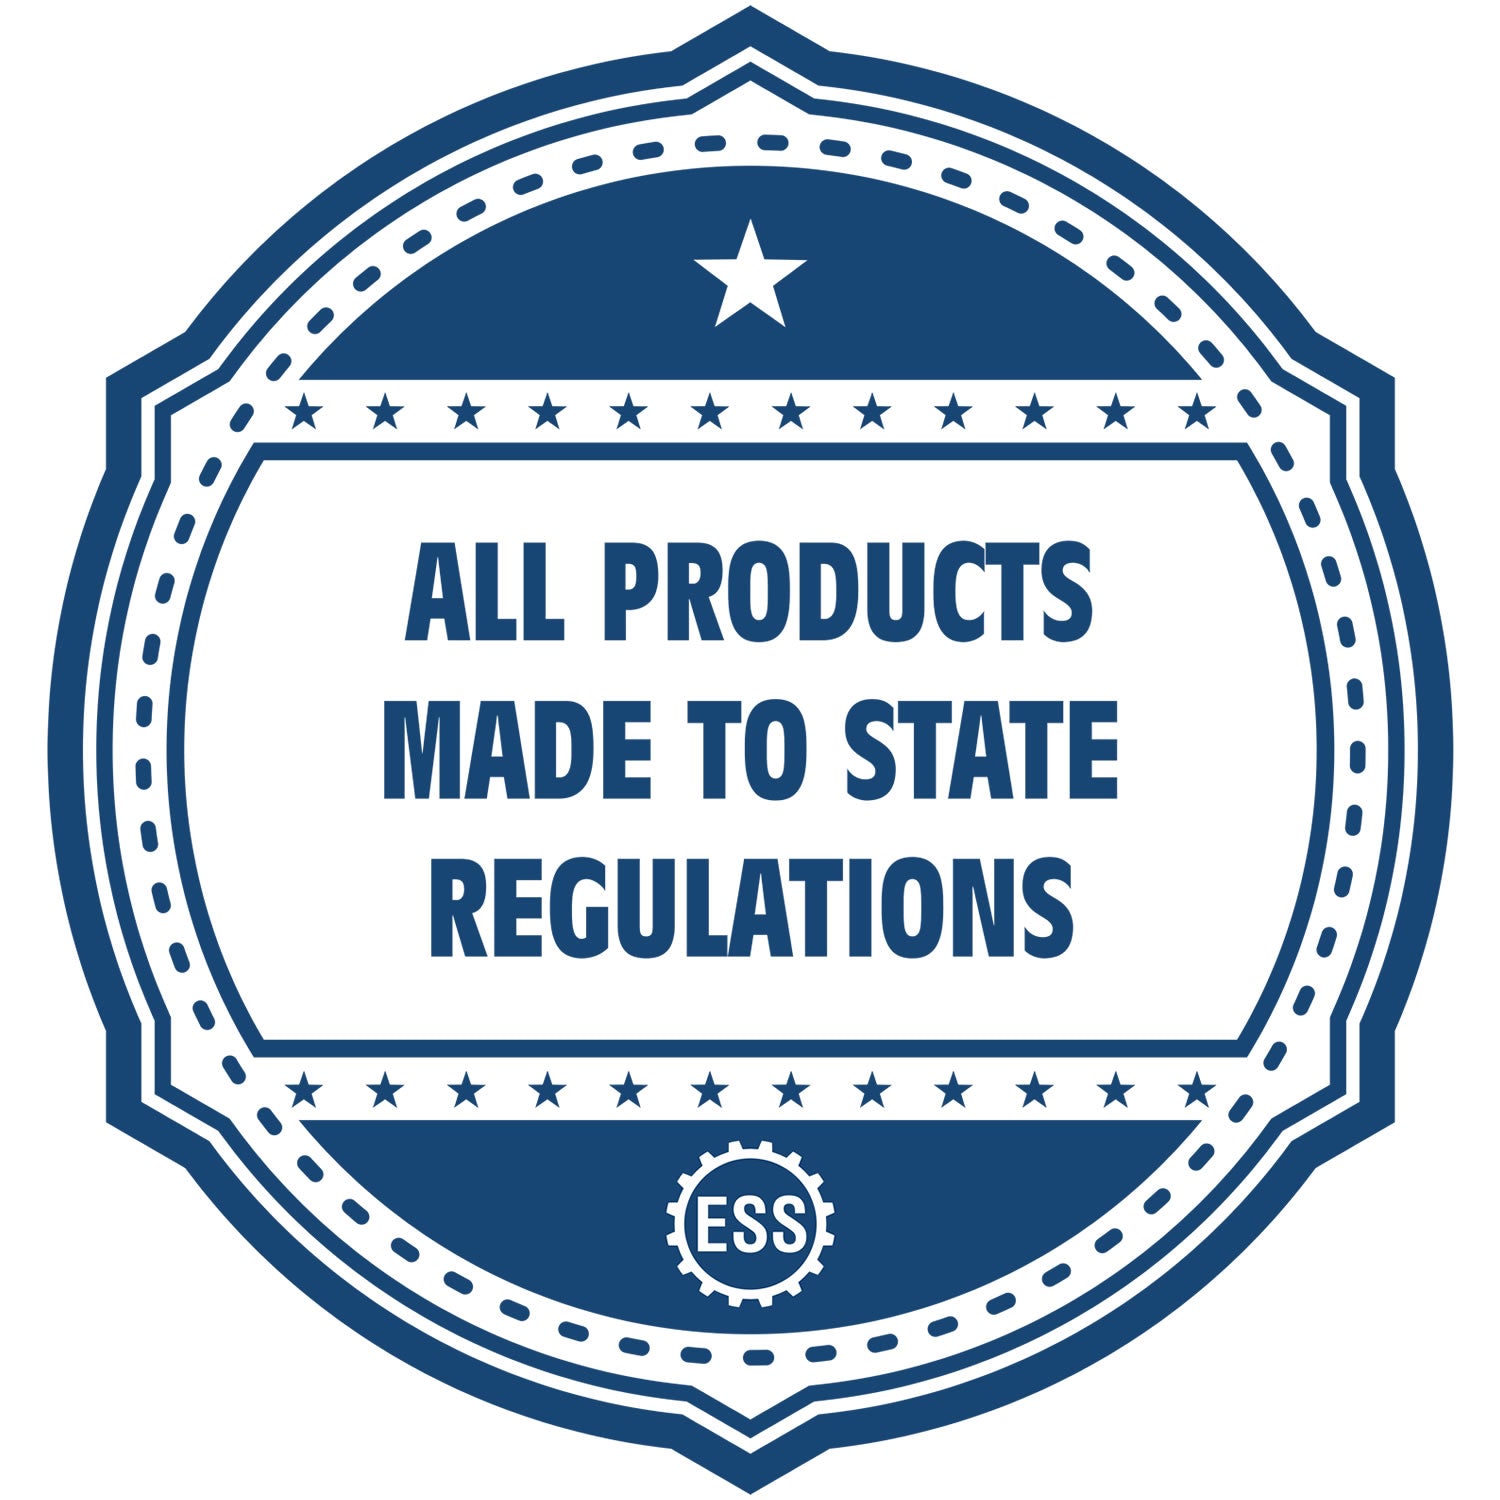 An icon or badge element for the Alabama Long Reach Landscape Architect Embossing Stamp showing that this product is made in compliance with state regulations.